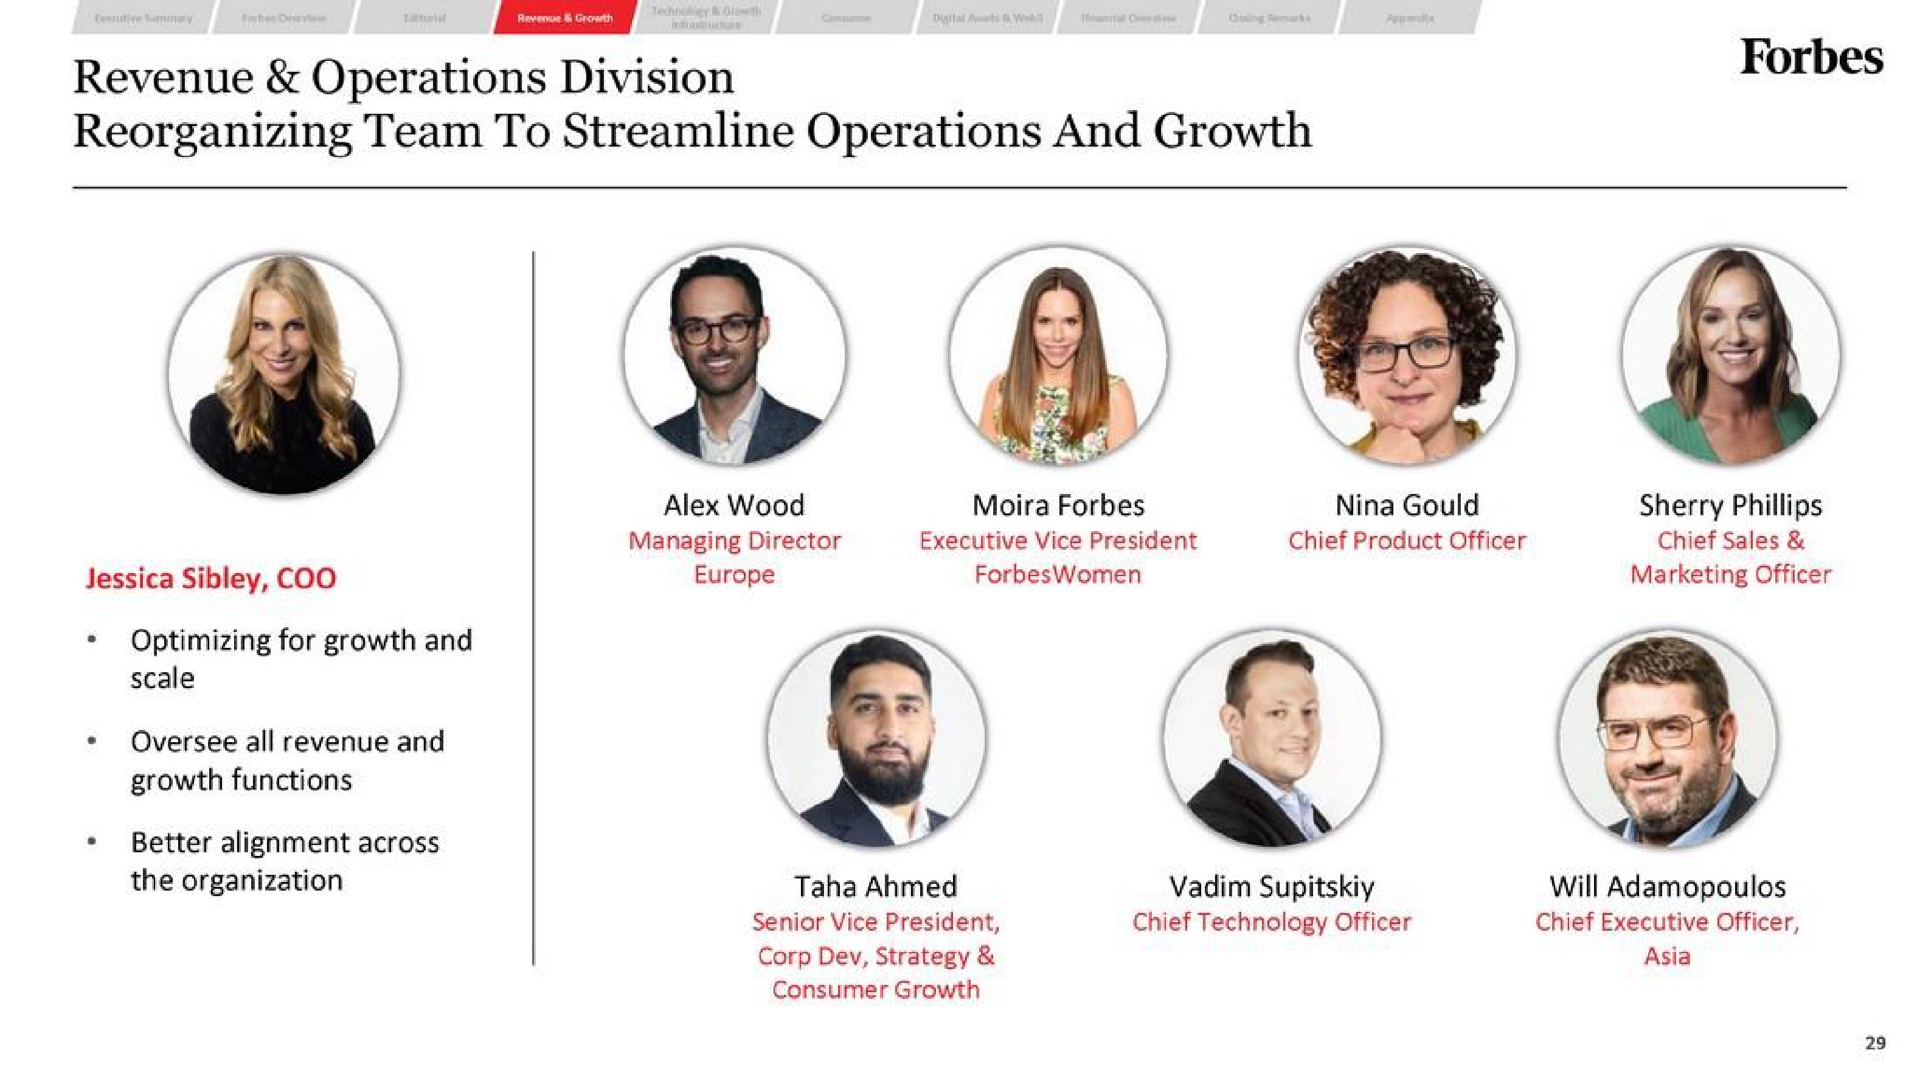 revenue operations division reorganizing team to streamline operations and growth | Forbes